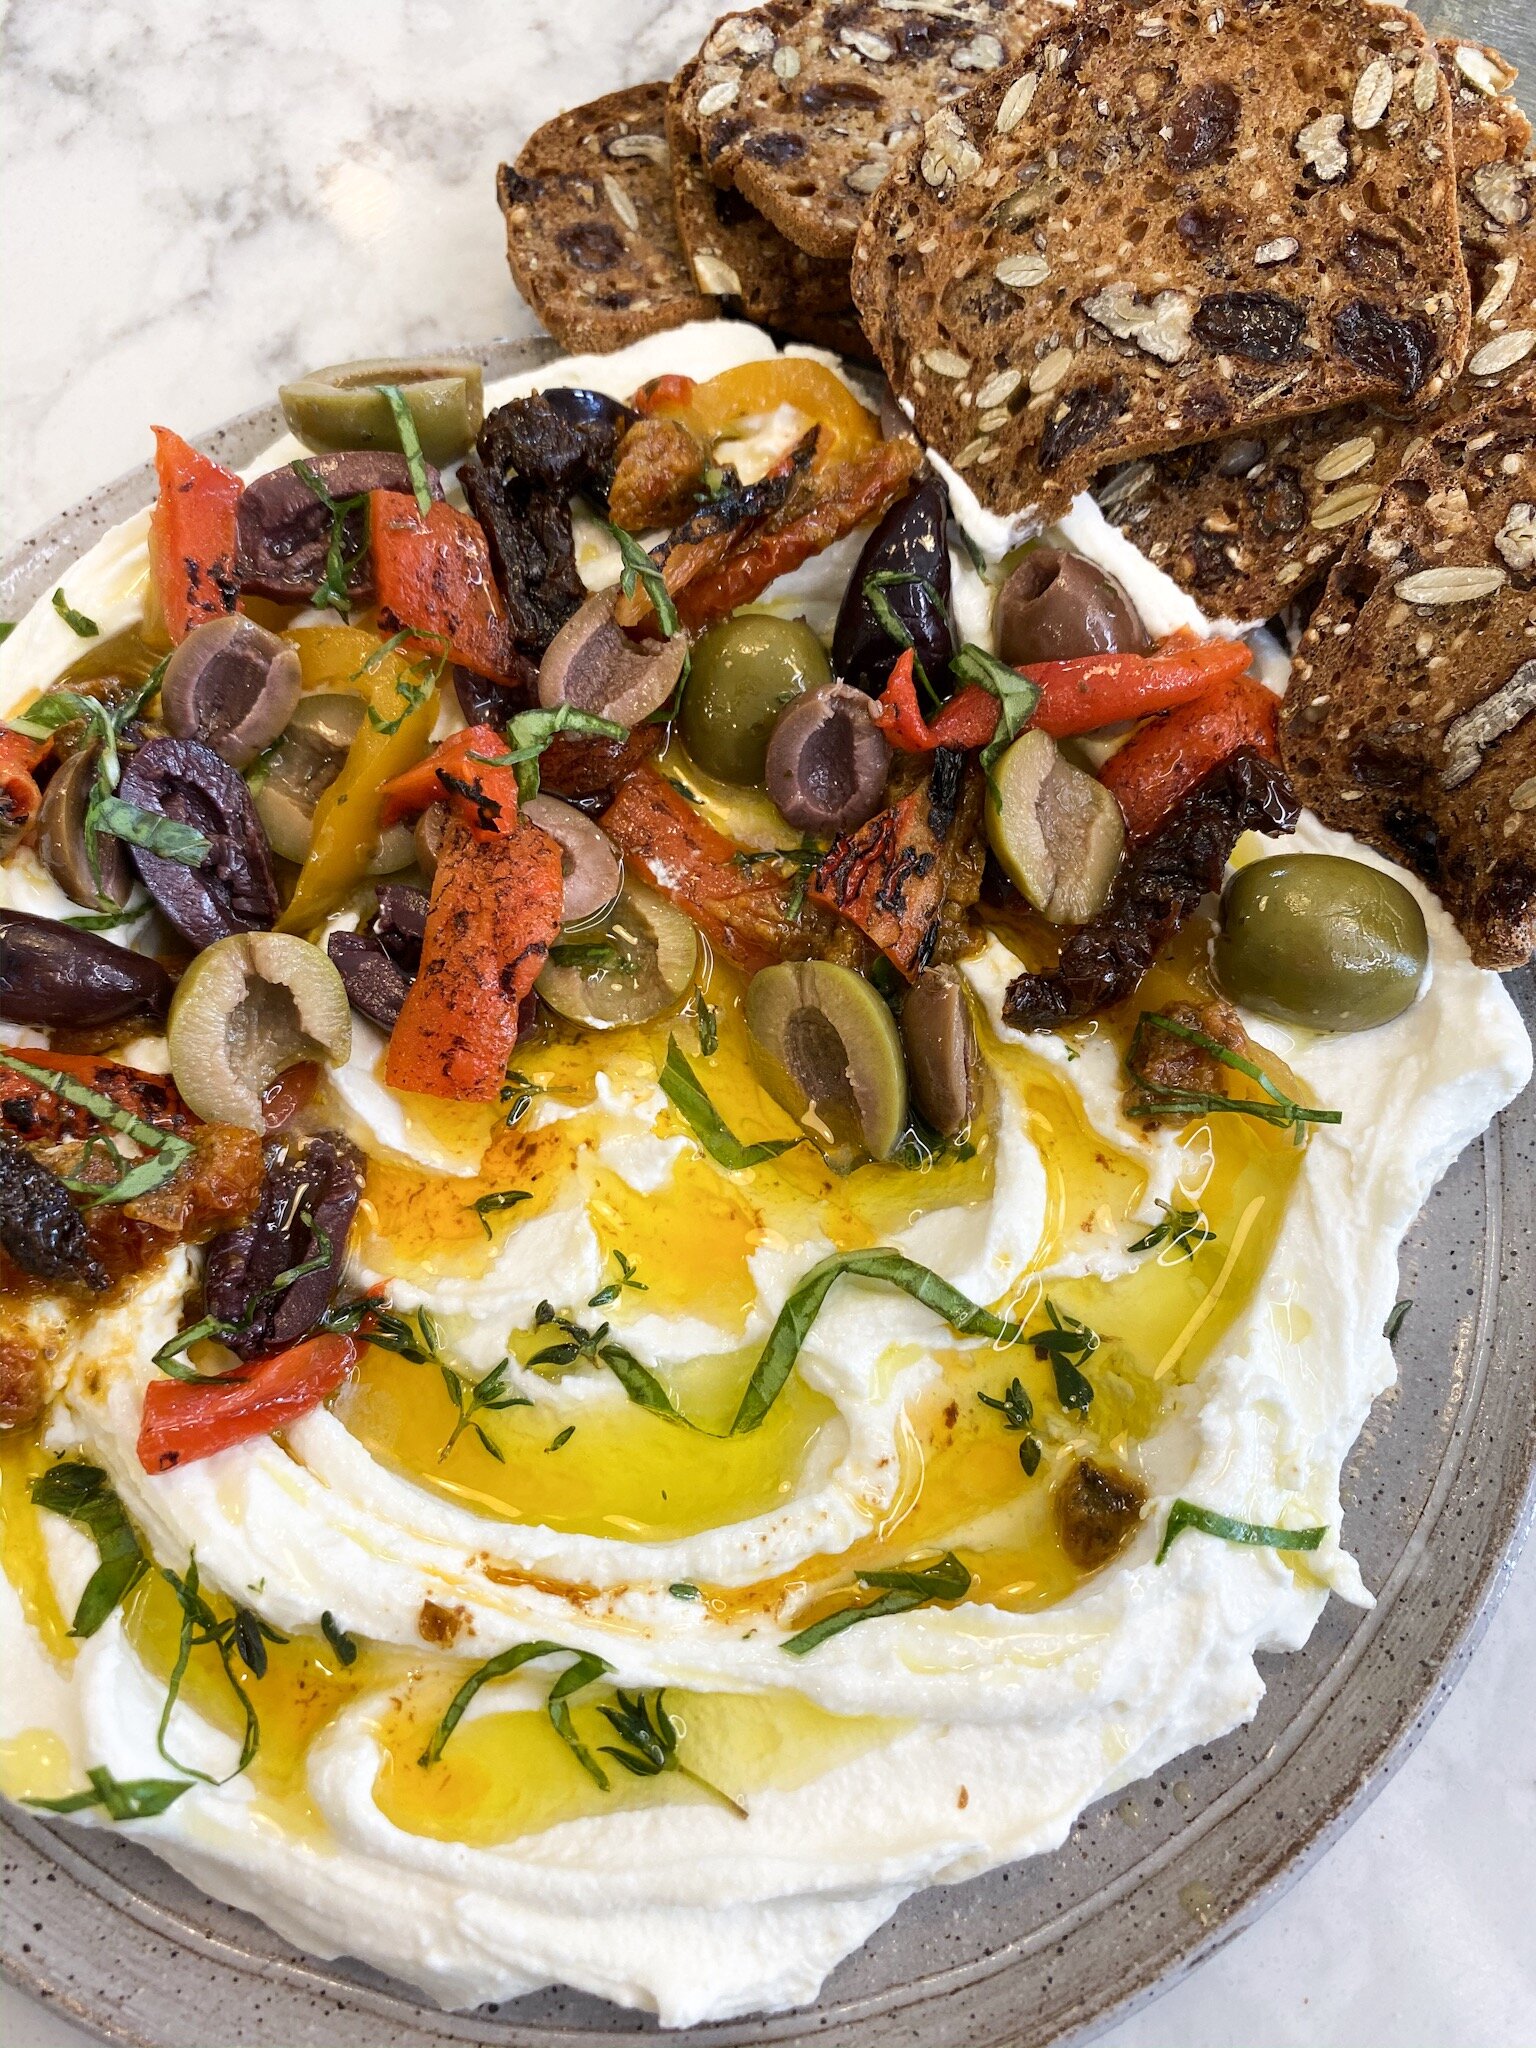 Goat Cheese Spread with Sun-dried Tomatoes, Olives and Roasted Red